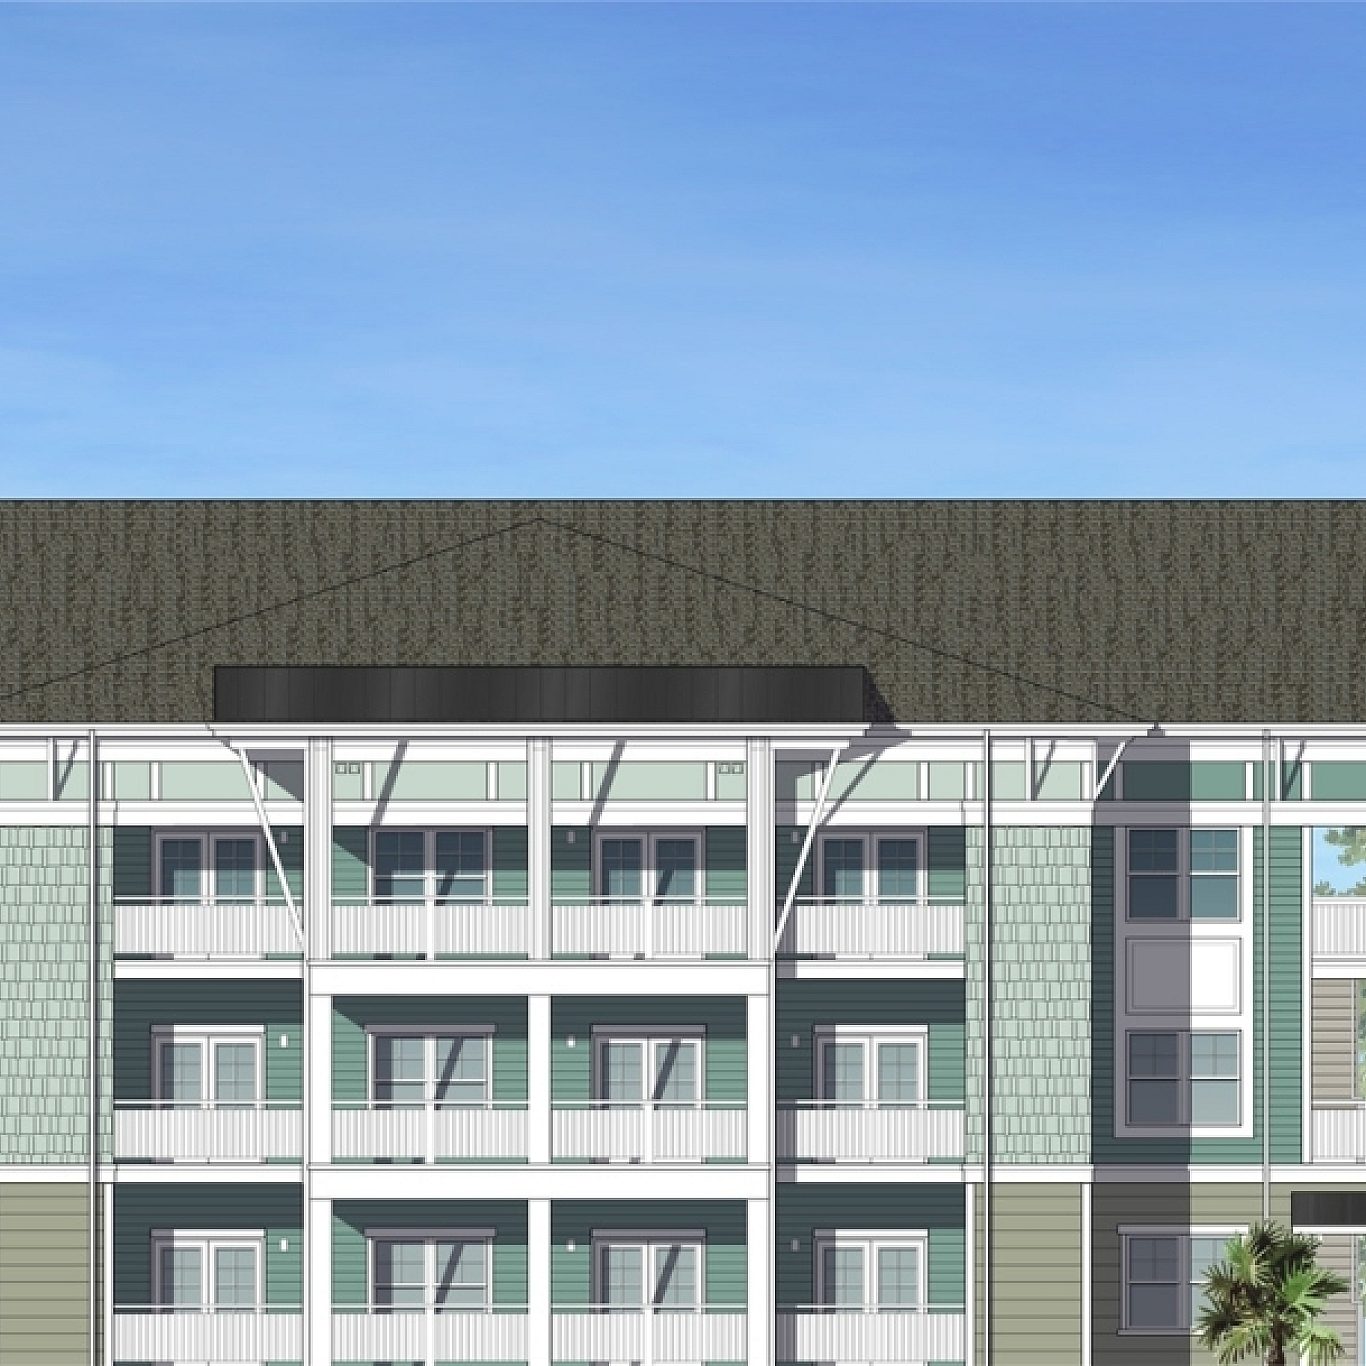 BLDG A1 Elevation Rendering B New colors small e1598297012358